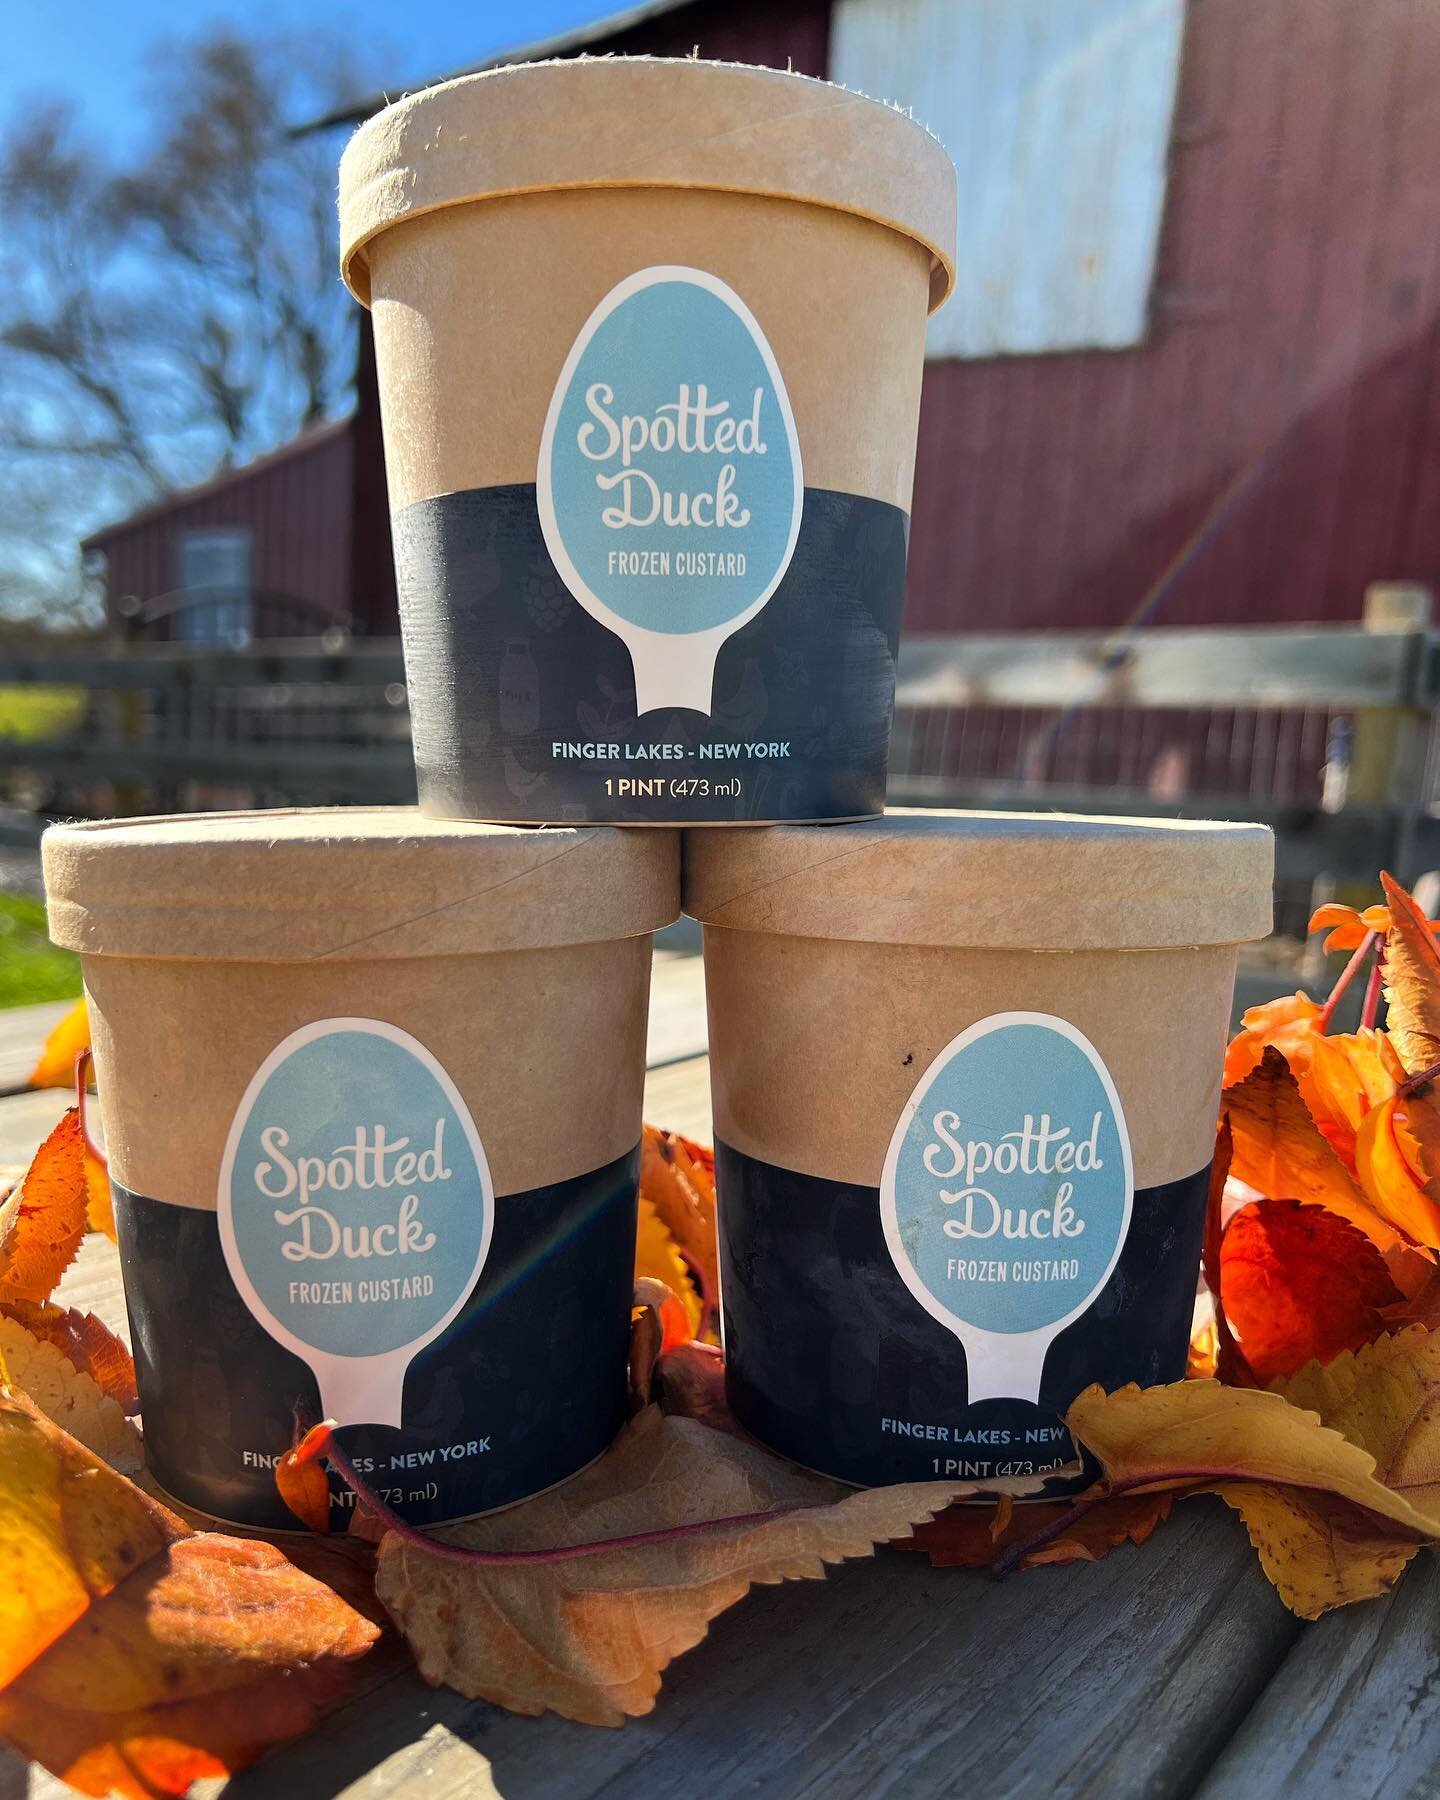 🚨 Stock up on seasonal pints and crew necks for a sweet and cozy Thanksgiving dinner! 🦃 

This Tuesday the 21st from 2:00-6:00pm we will have 15 plus flavors available in pints. This includes your holiday favorites like Pumpkin, Apple Pie, Cinnamon